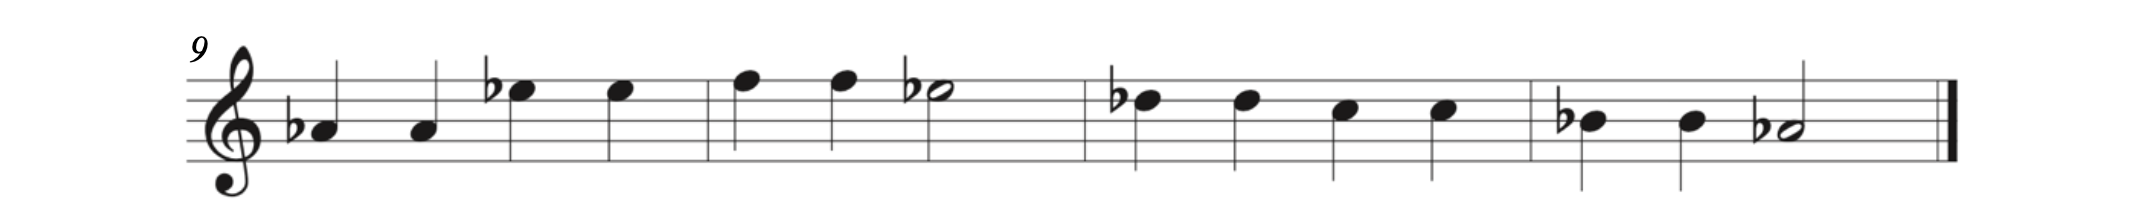 "Twinkle Twinkle Little Star" with accidentals A-flat, E-flat, D-flat, and B-flat.